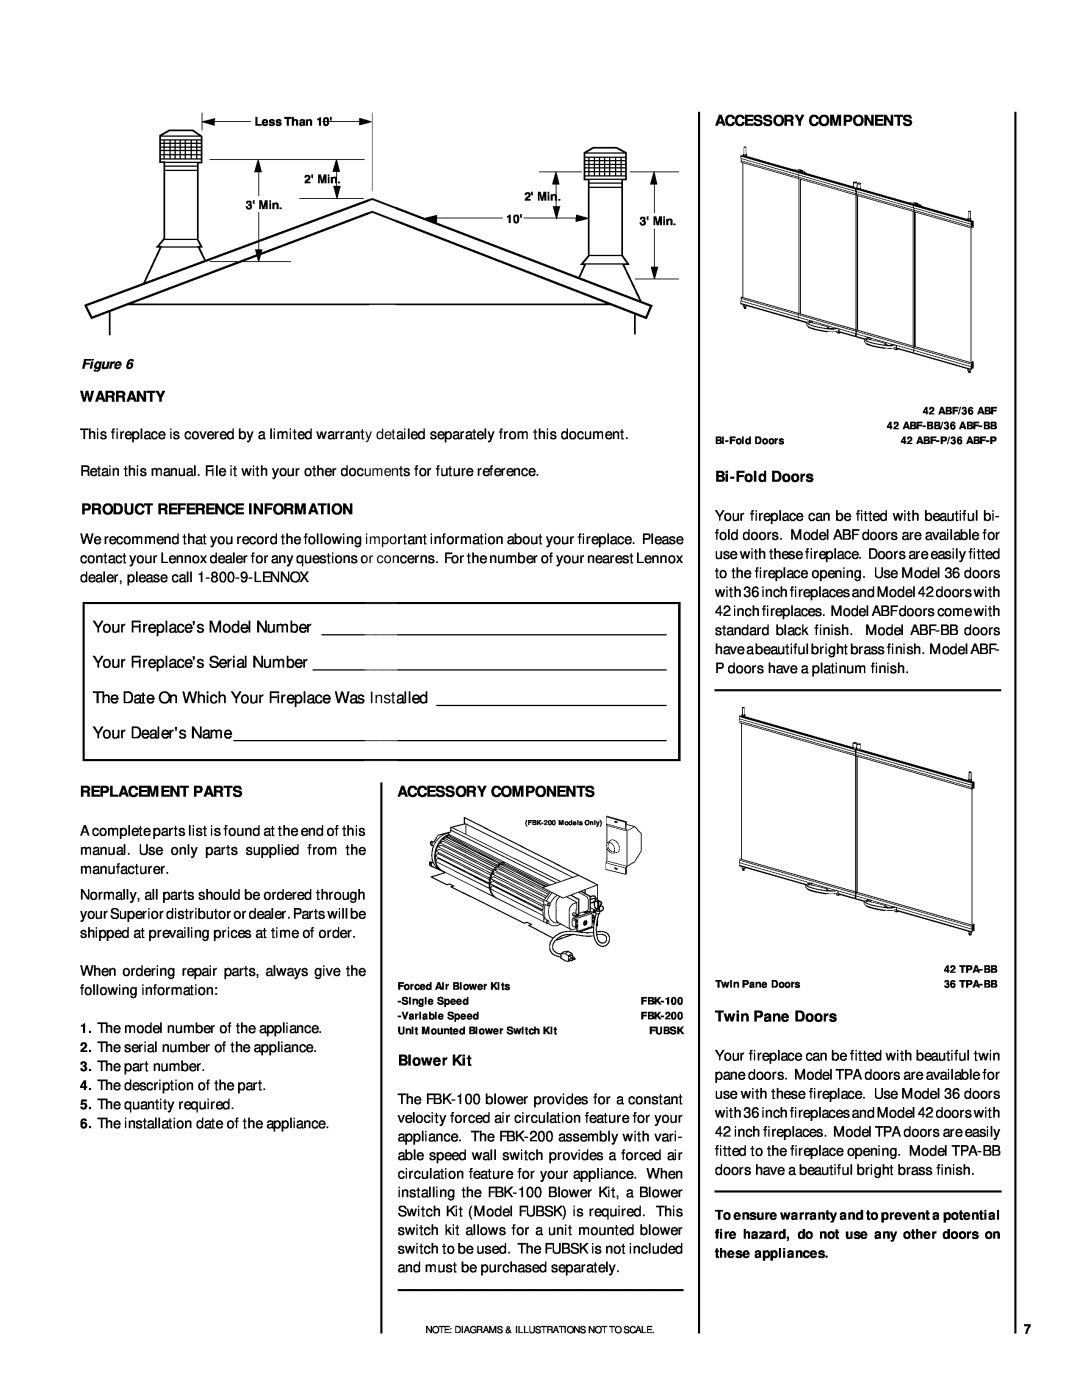 Superior BC-36/42-2 manual Accessory Components, Warranty, Product Reference Information, Bi-FoldDoors, Replacement Parts 